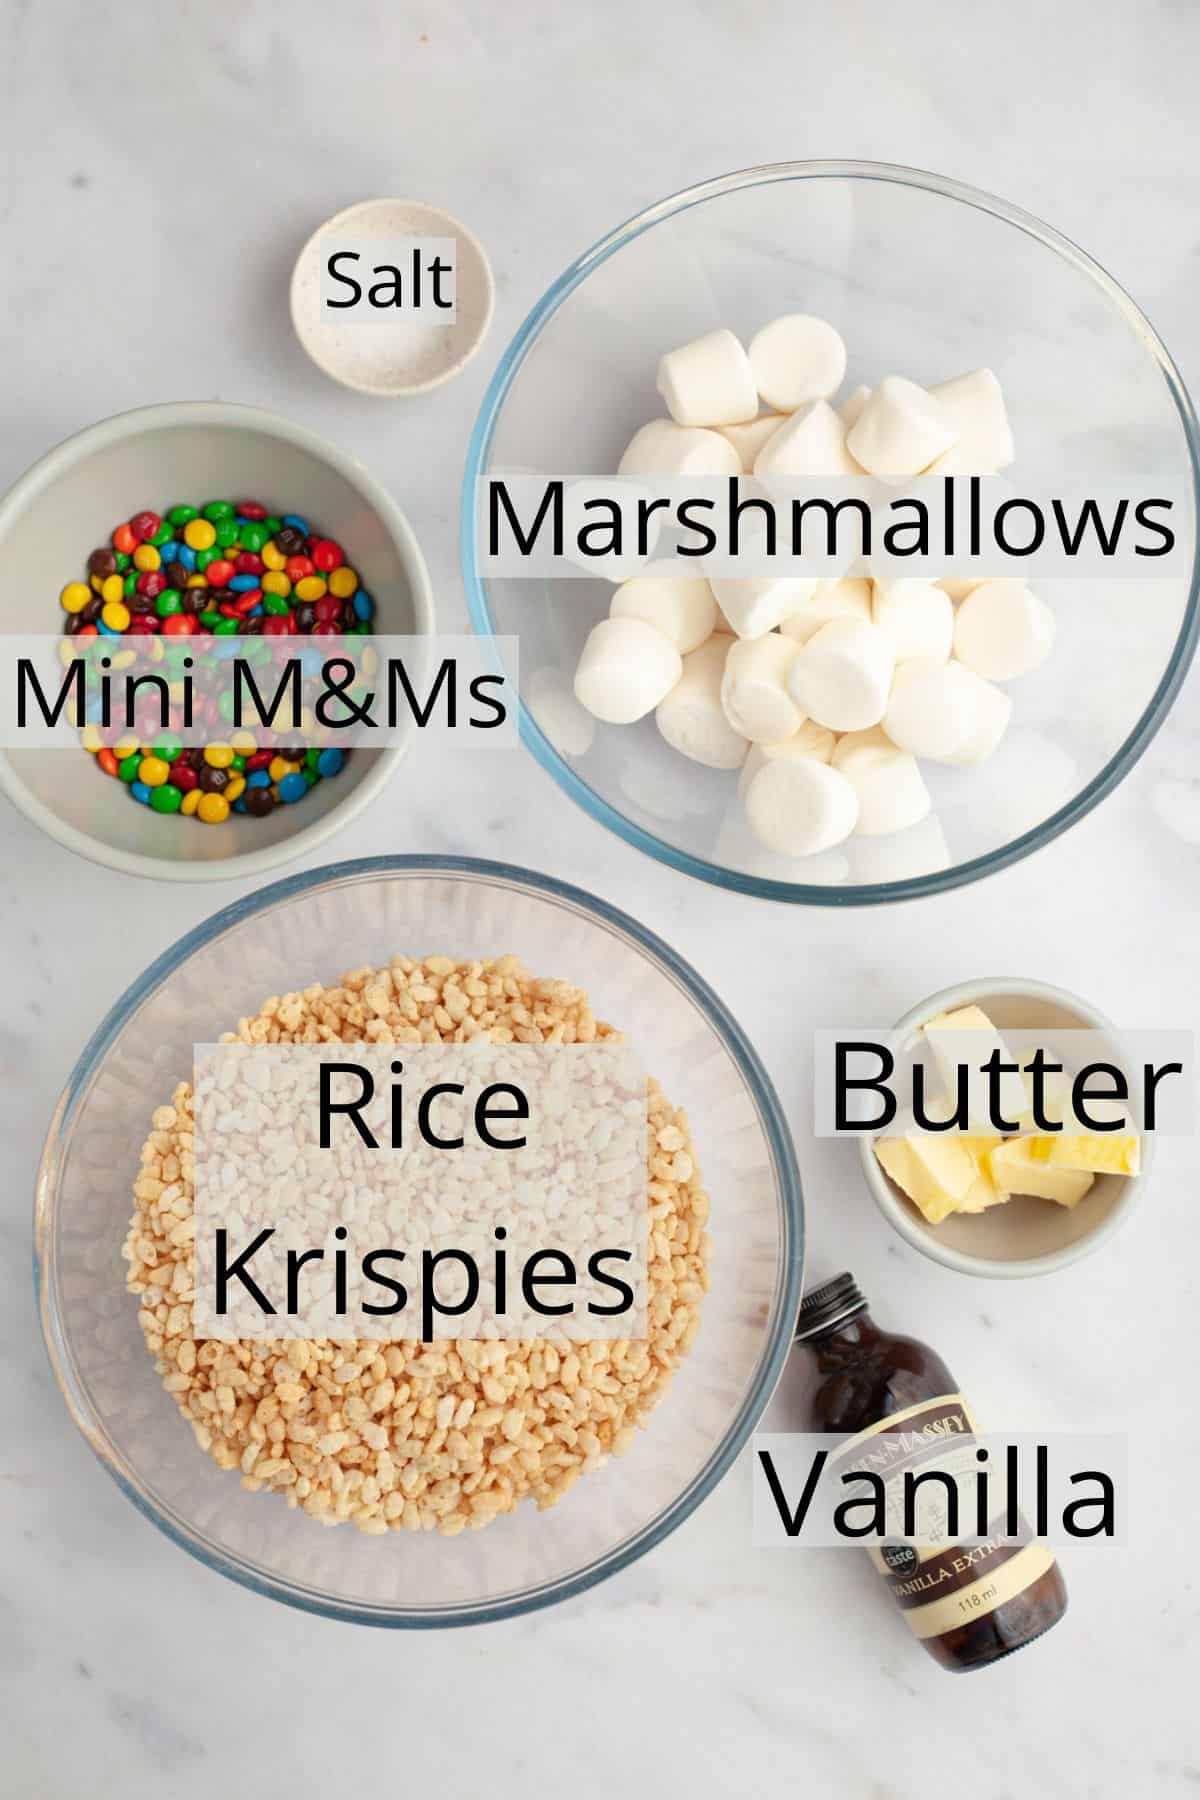 All the ingredients needed to make m&m rice krispie treats weighed out into small bowls.